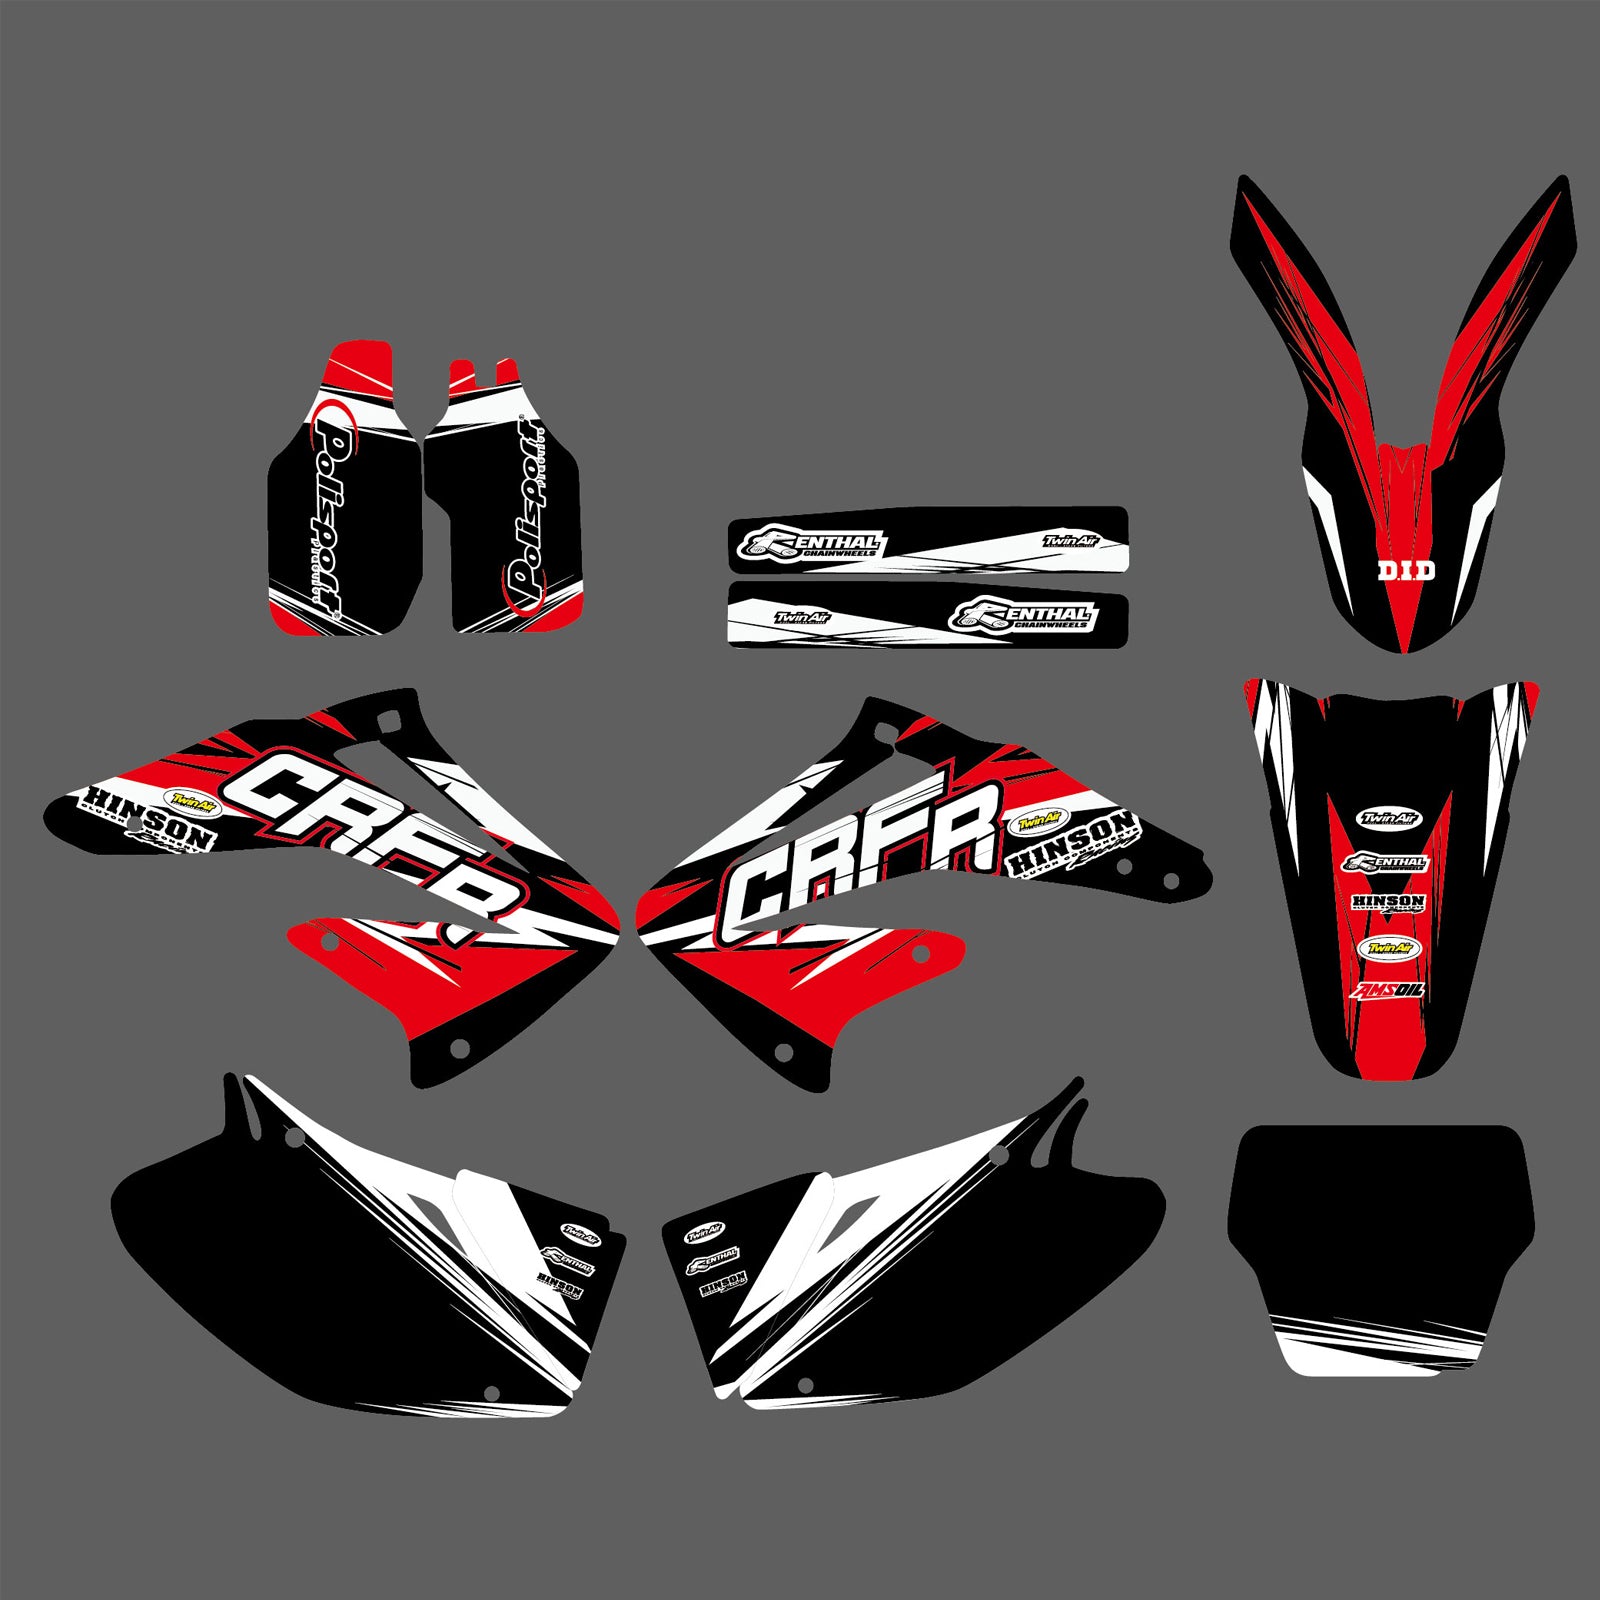 Motorcycle Graphics Backgrounds Decal Sticker For Honda CRF450R 02-04